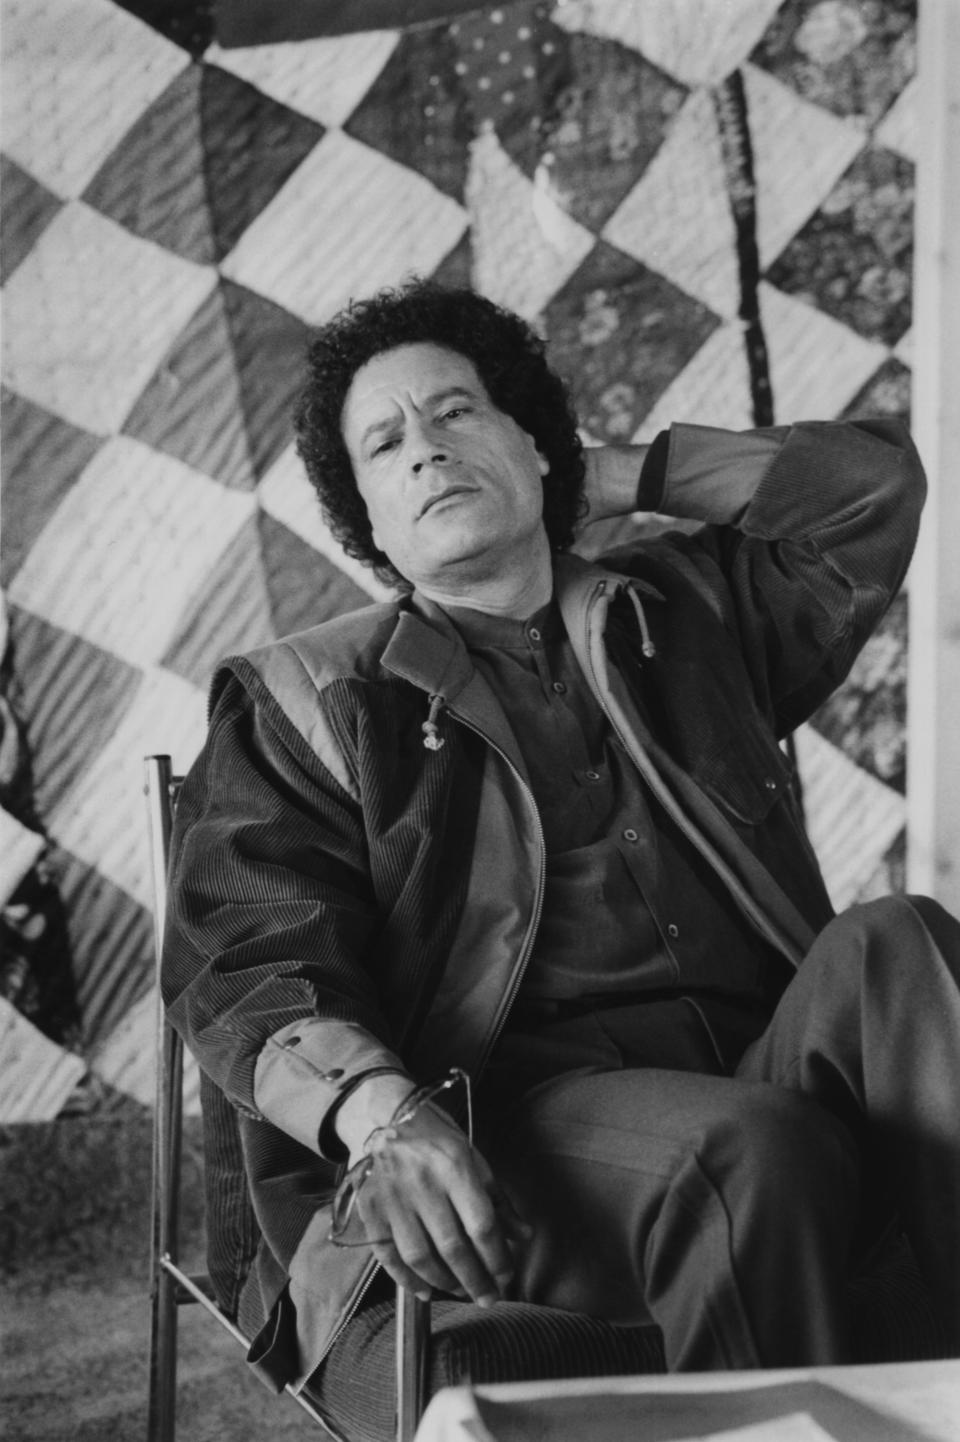 Gaddafi has got this leisure outfit just right - and he knows it. Padded corduroy jacket with press studs cuffs and a draw string collar were all the rage back in 1985.     Gaddafi in Libya, February 1985.